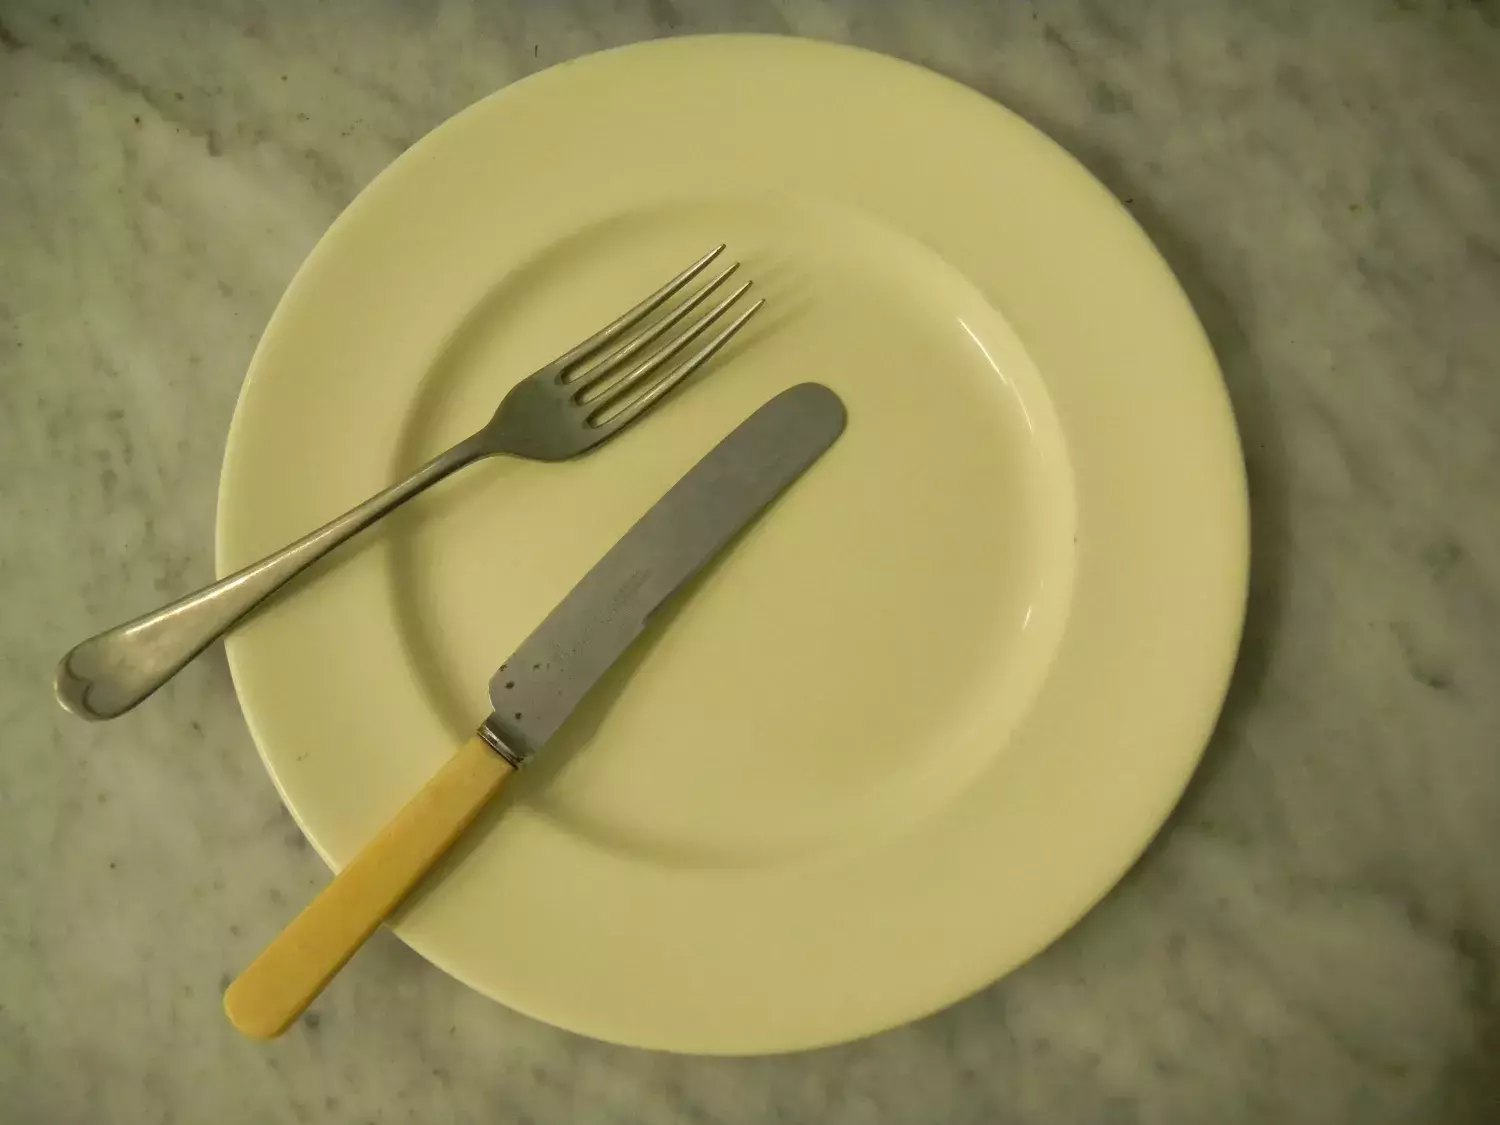 A yellow plate with a knife and fork on top of it.  